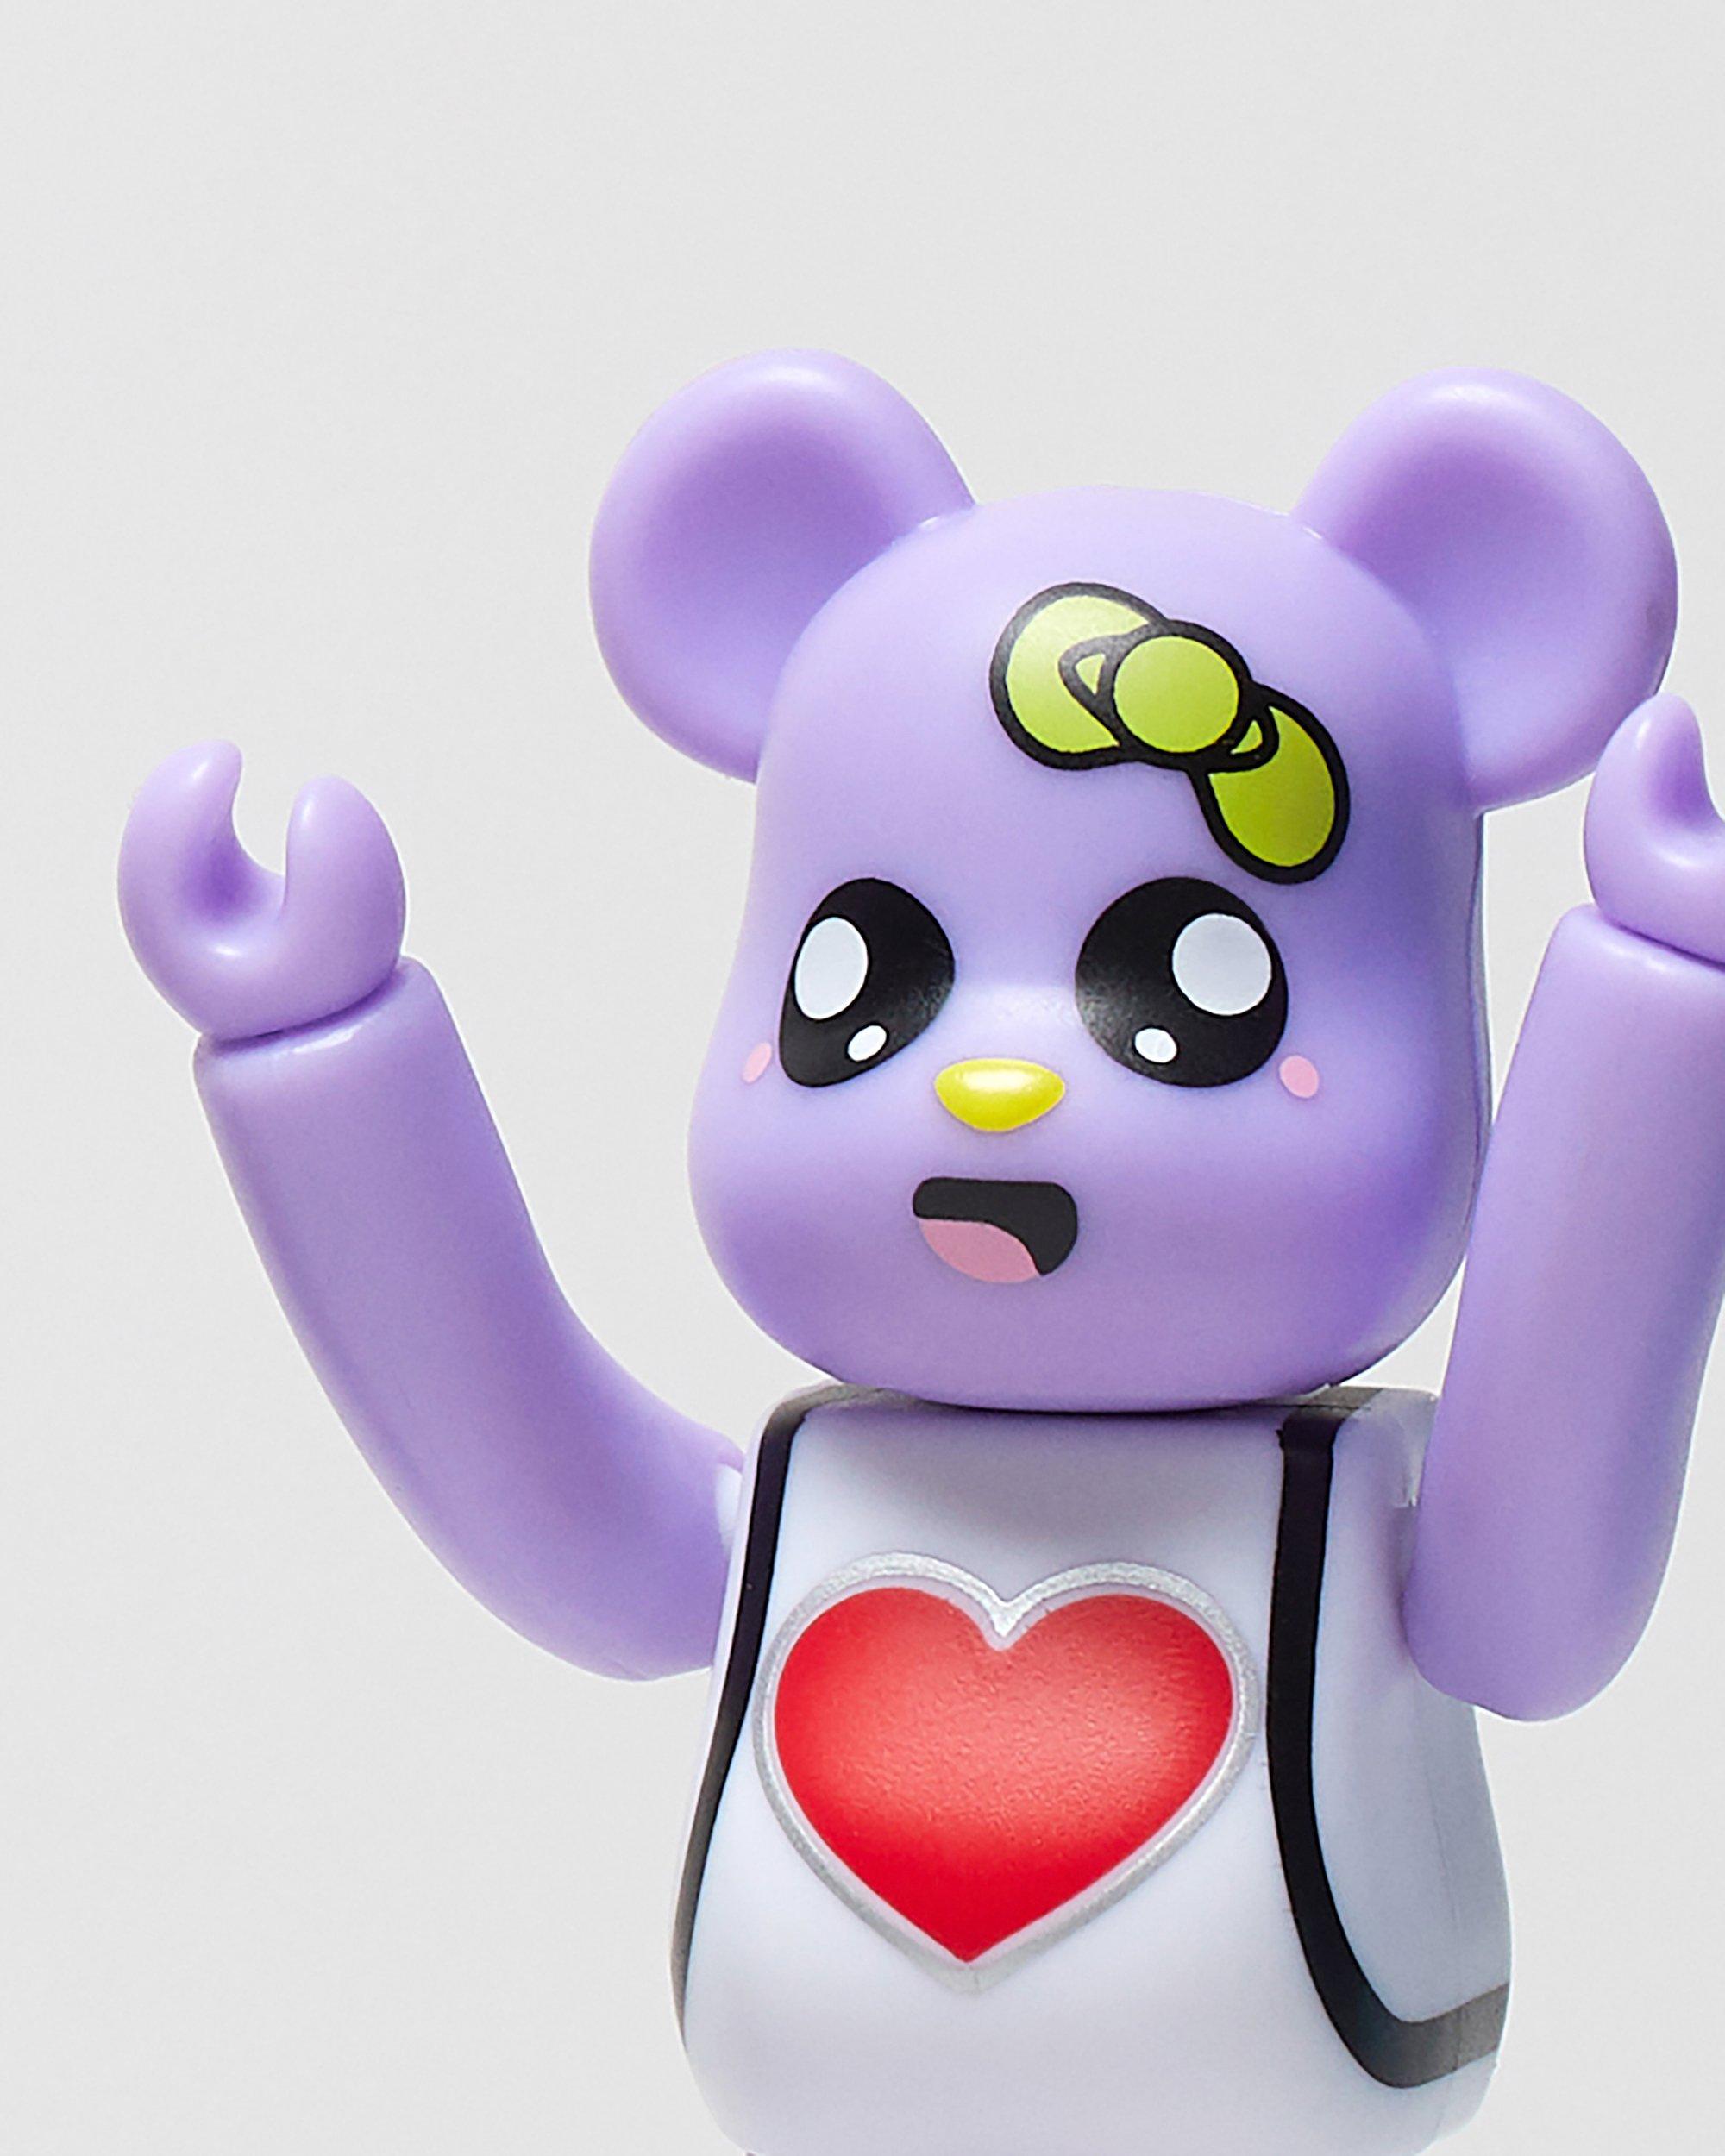 FIGURINE BE@RBRICK 00'SFIGURINES BE@RBRICK À COLLECTIONNER Dr. Martens